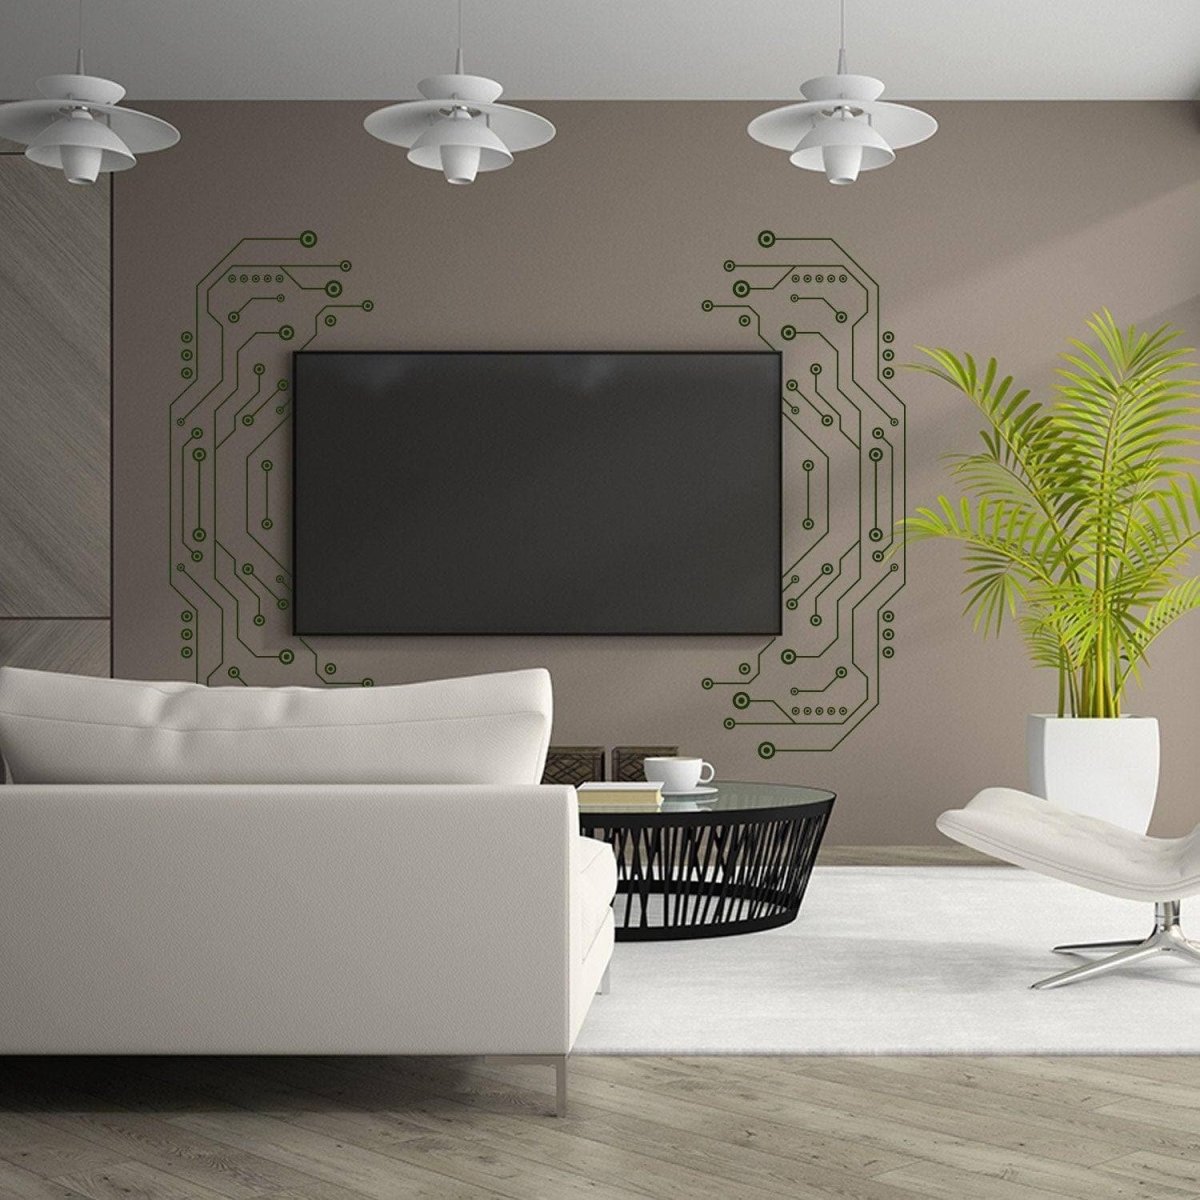 Large Vinyl Decals for TV Wall Décor - Transform Your Space with Style - Decords